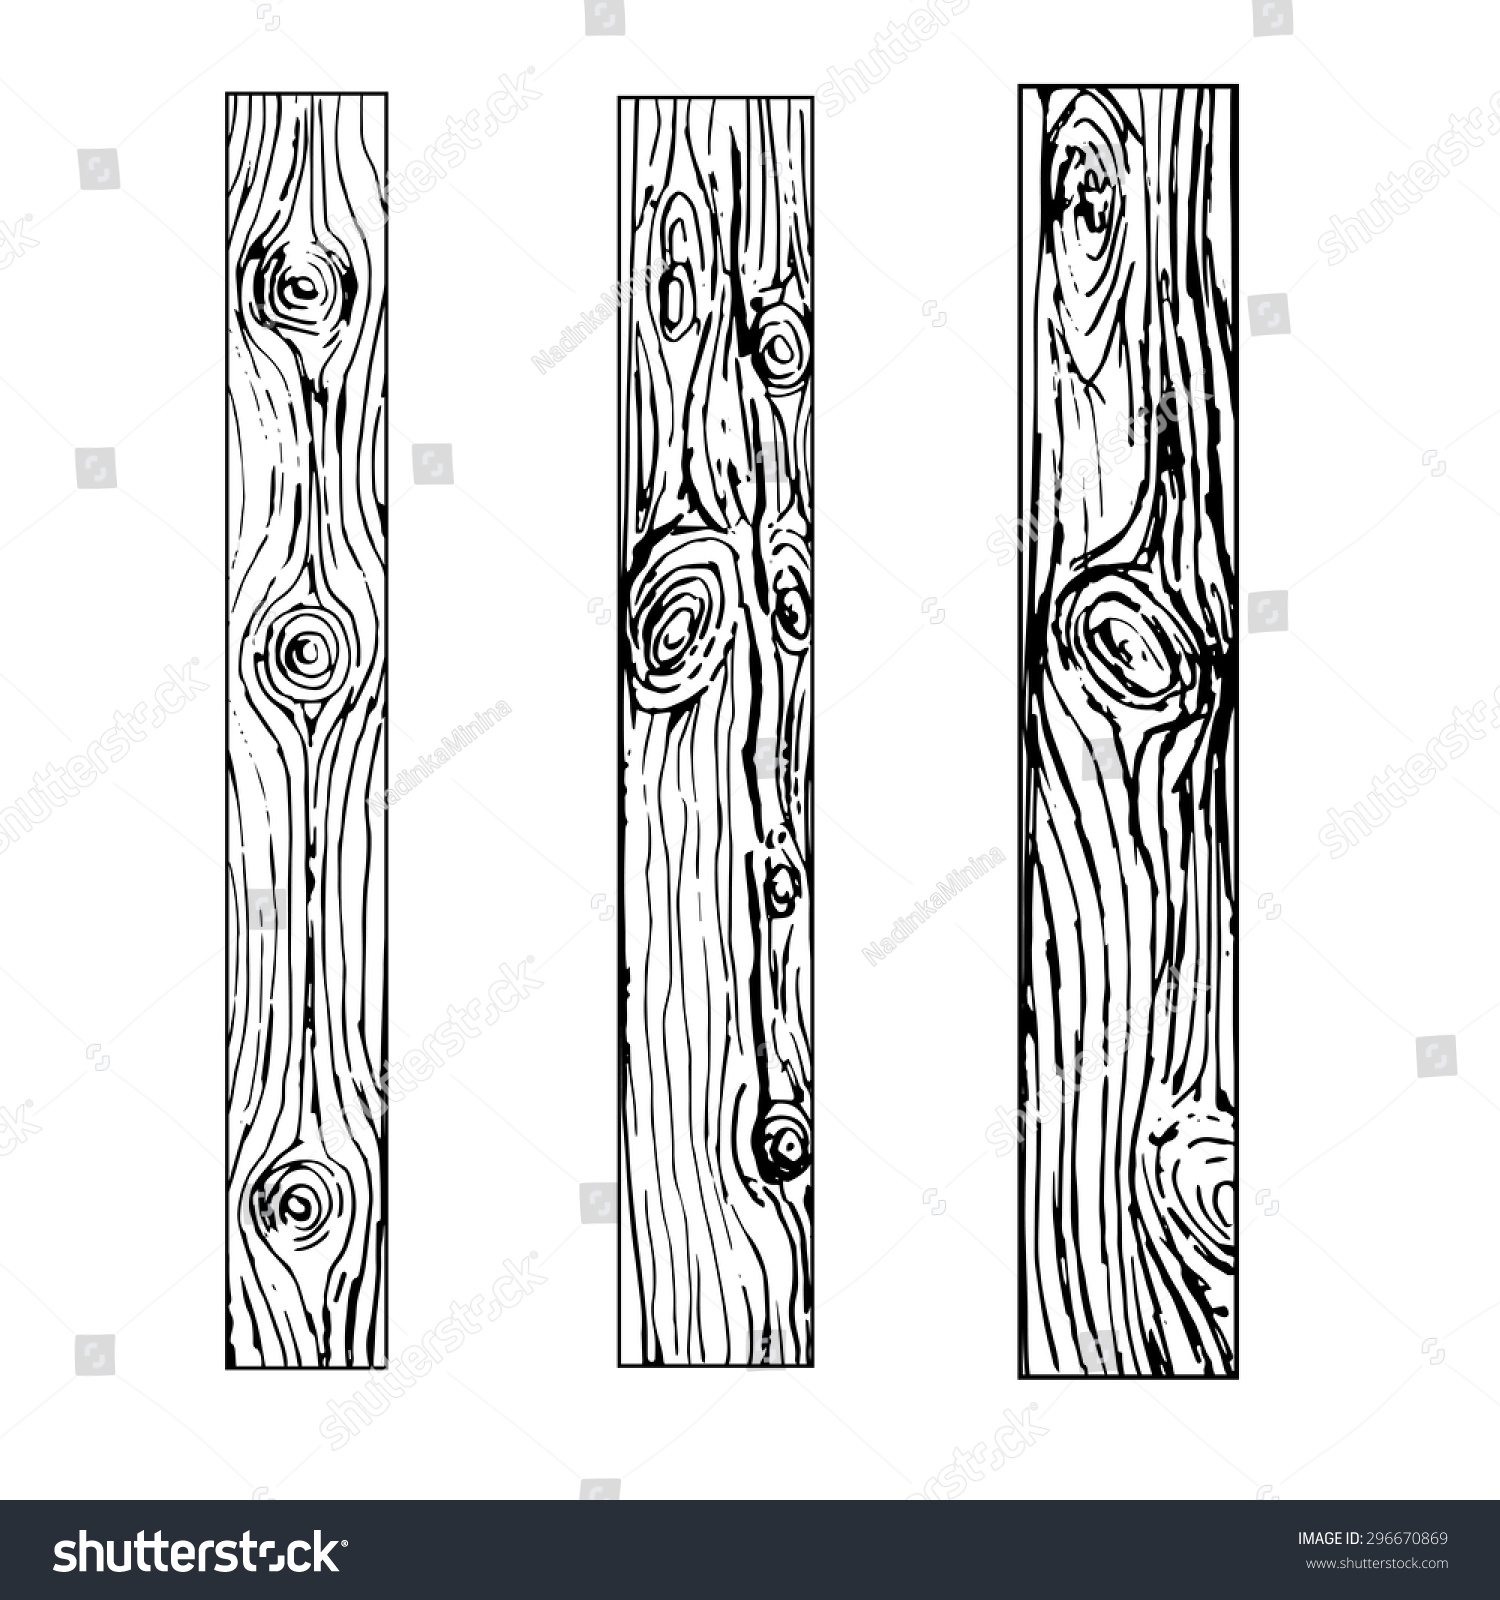 17,334 Wood plank drawing Stock Illustrations, Images & Vectors